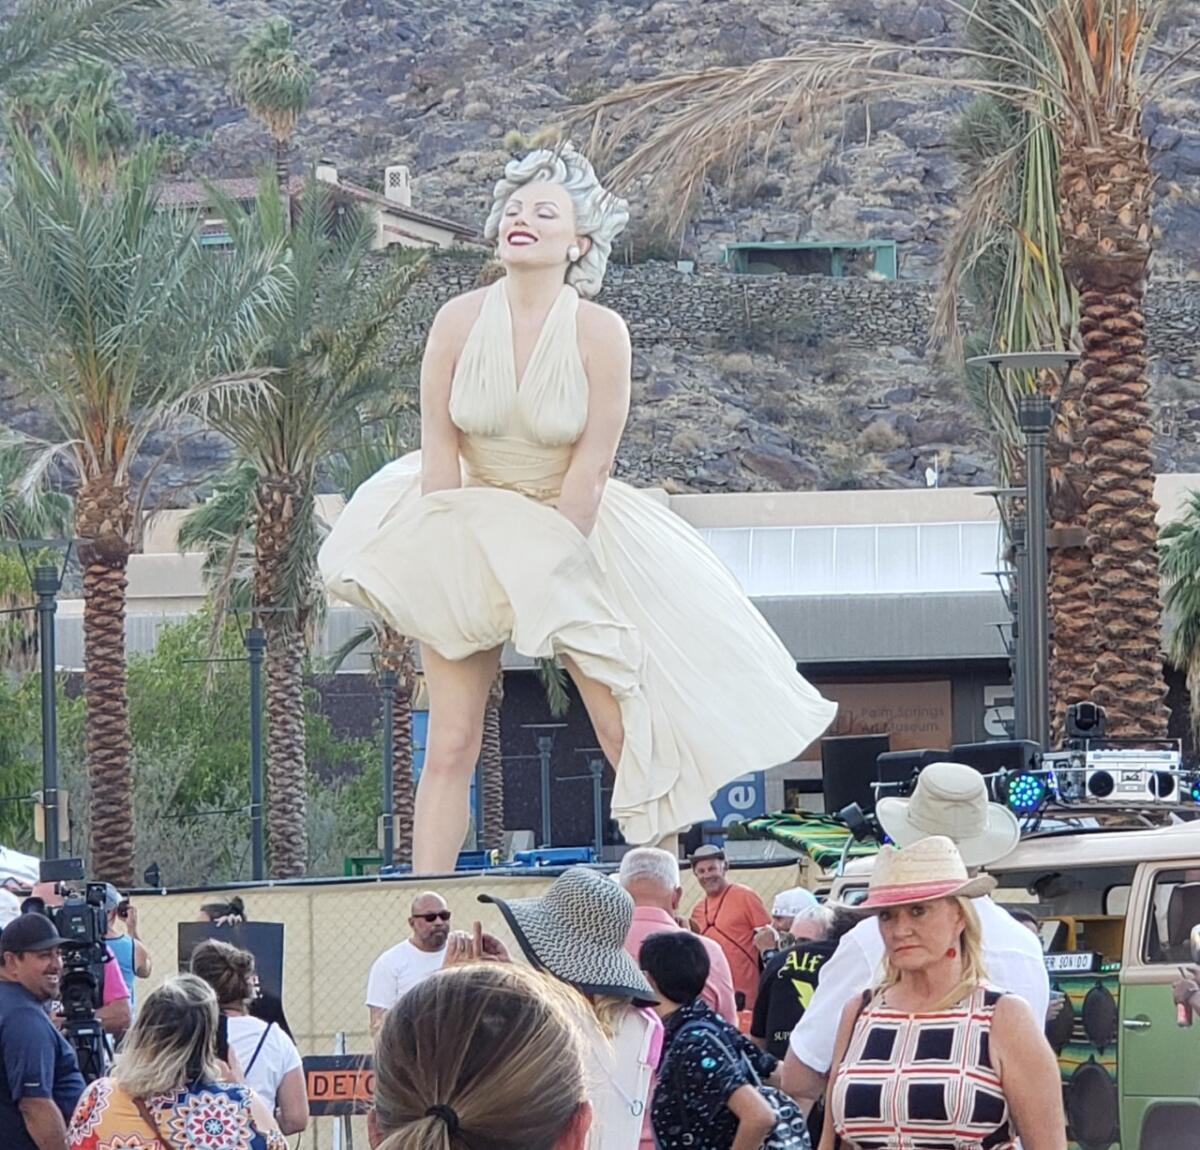 Did Marilyn Monroe live in Palm Springs? Depends who you ask